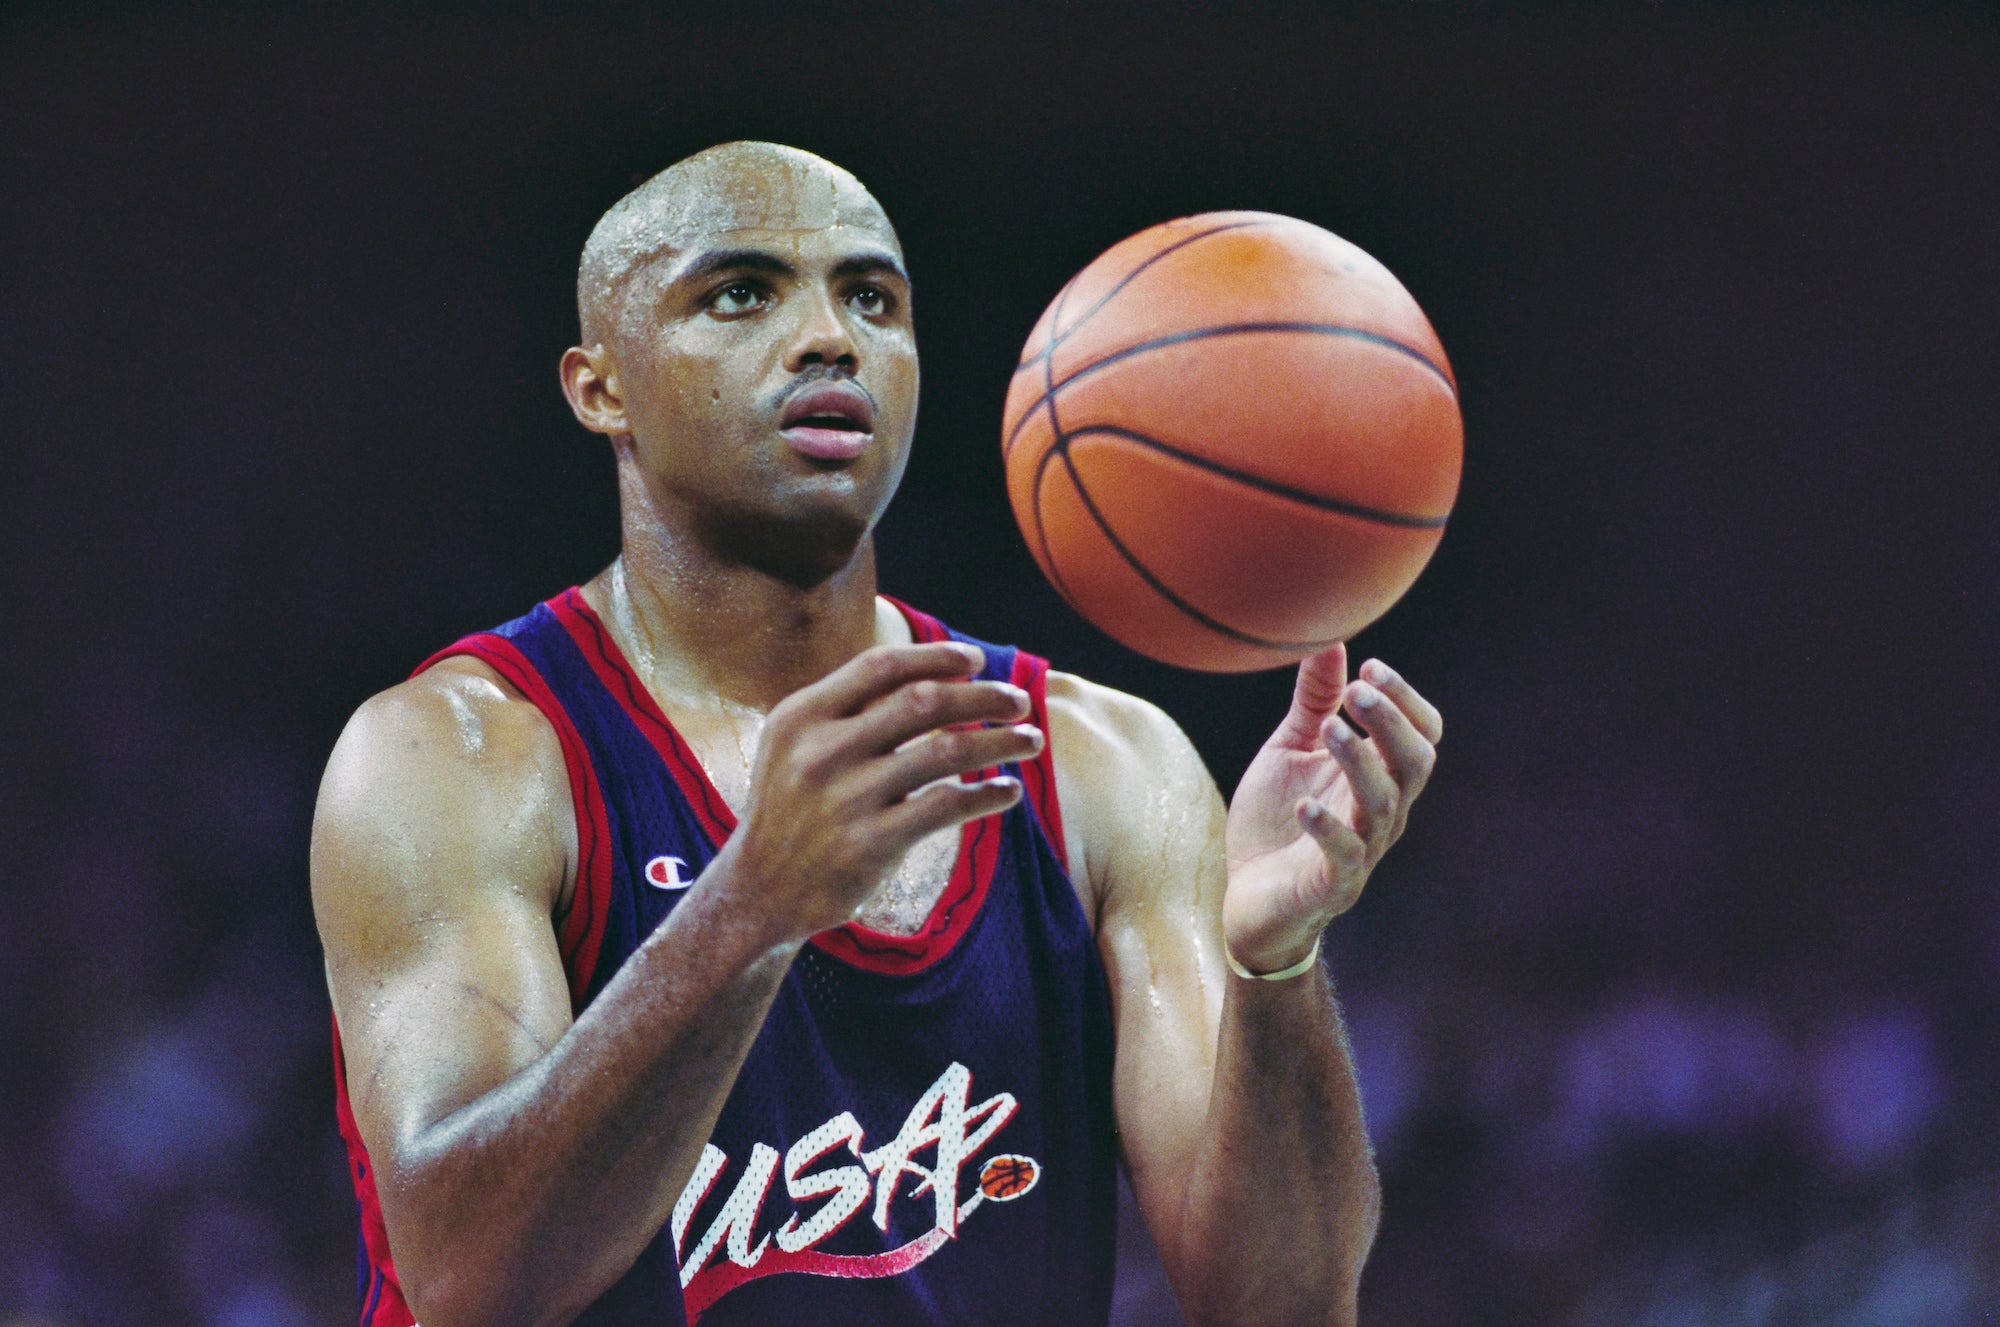 Former NBA star Charles Barkley | Fresh Air Archive: Interviews with Terry Gross